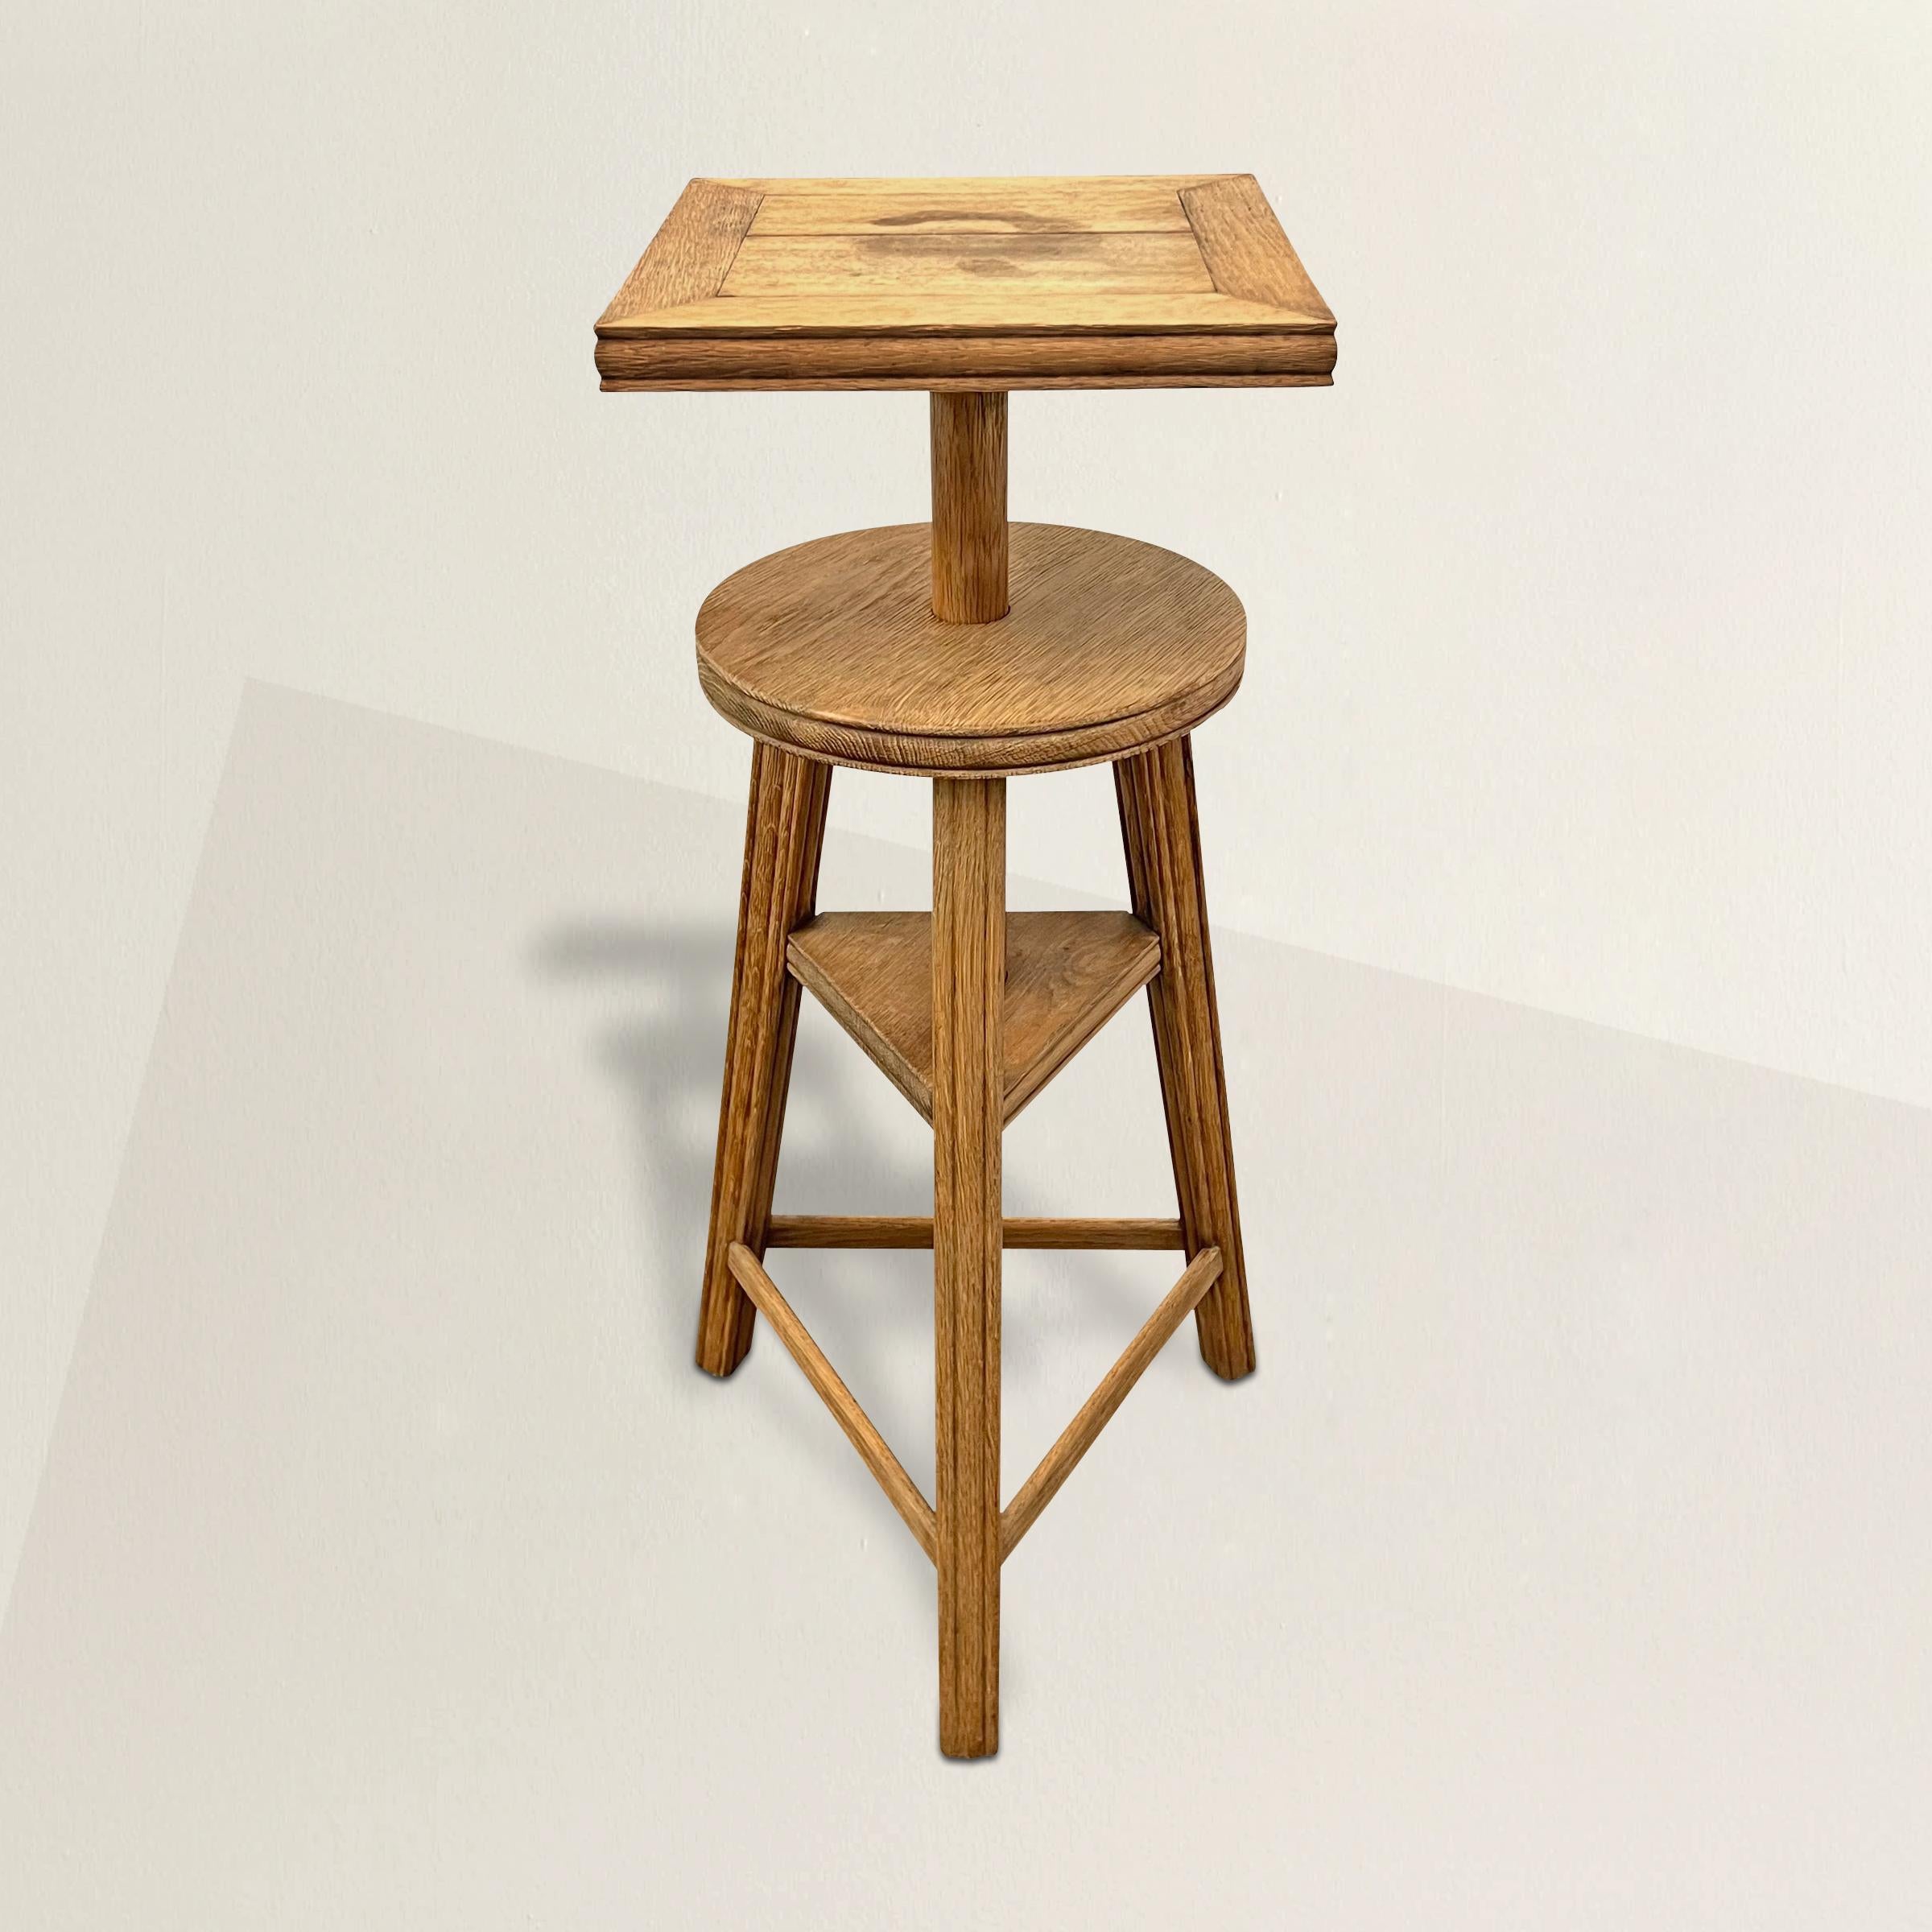 A chic early 20th center French oak Sculptor's stand with a top that spins and adjusts from 27 inches to 33 inches in height.  A simple oak pin holds the top in place.  Perfect for displaying your favorite vase or objet d'art.  